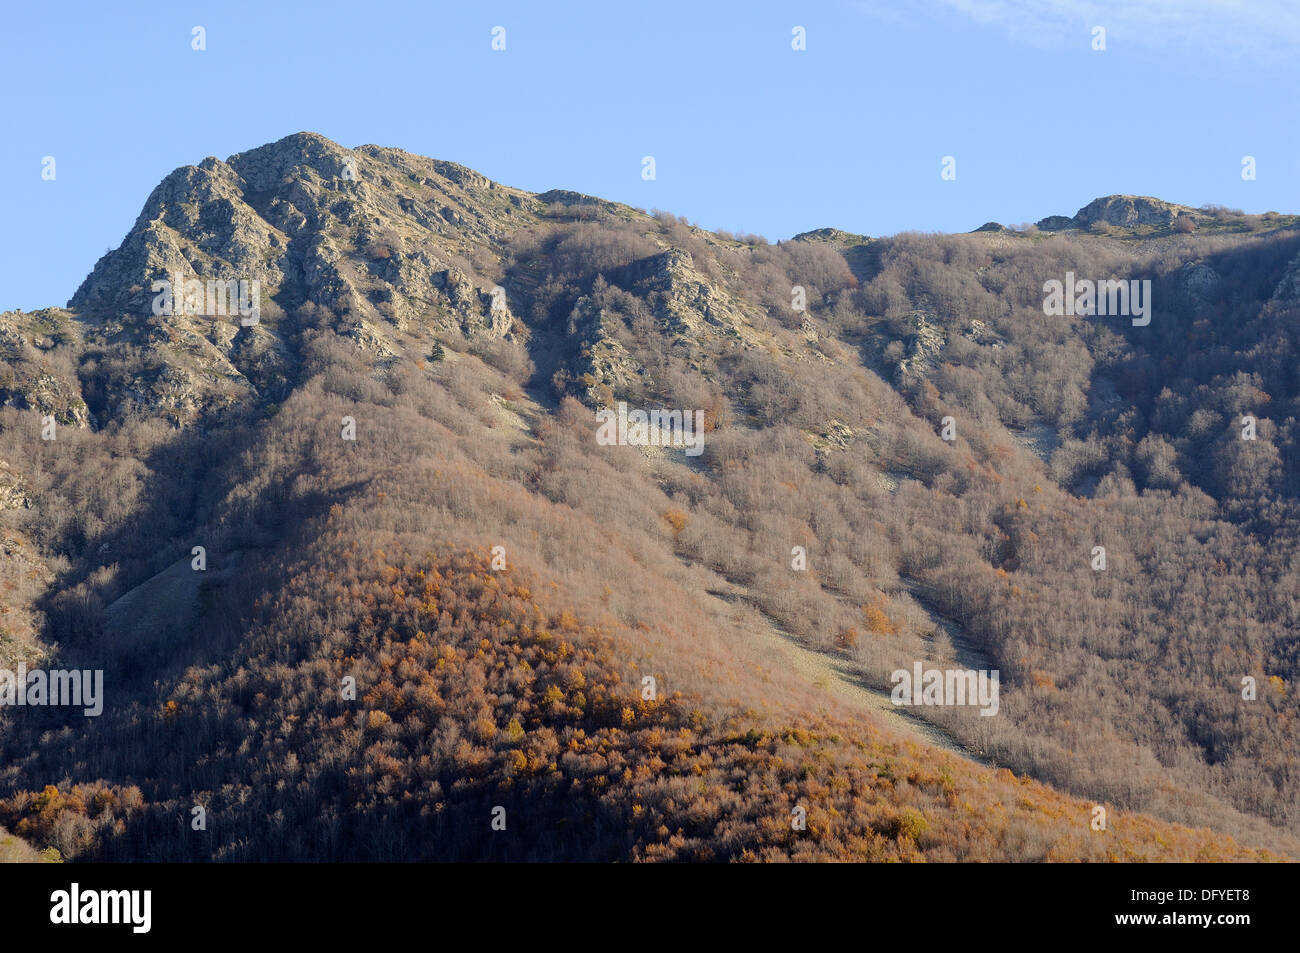 Horizontal picture of beautiful landscape image of mountain forest covered in Autumn fall colors. Stock Photo